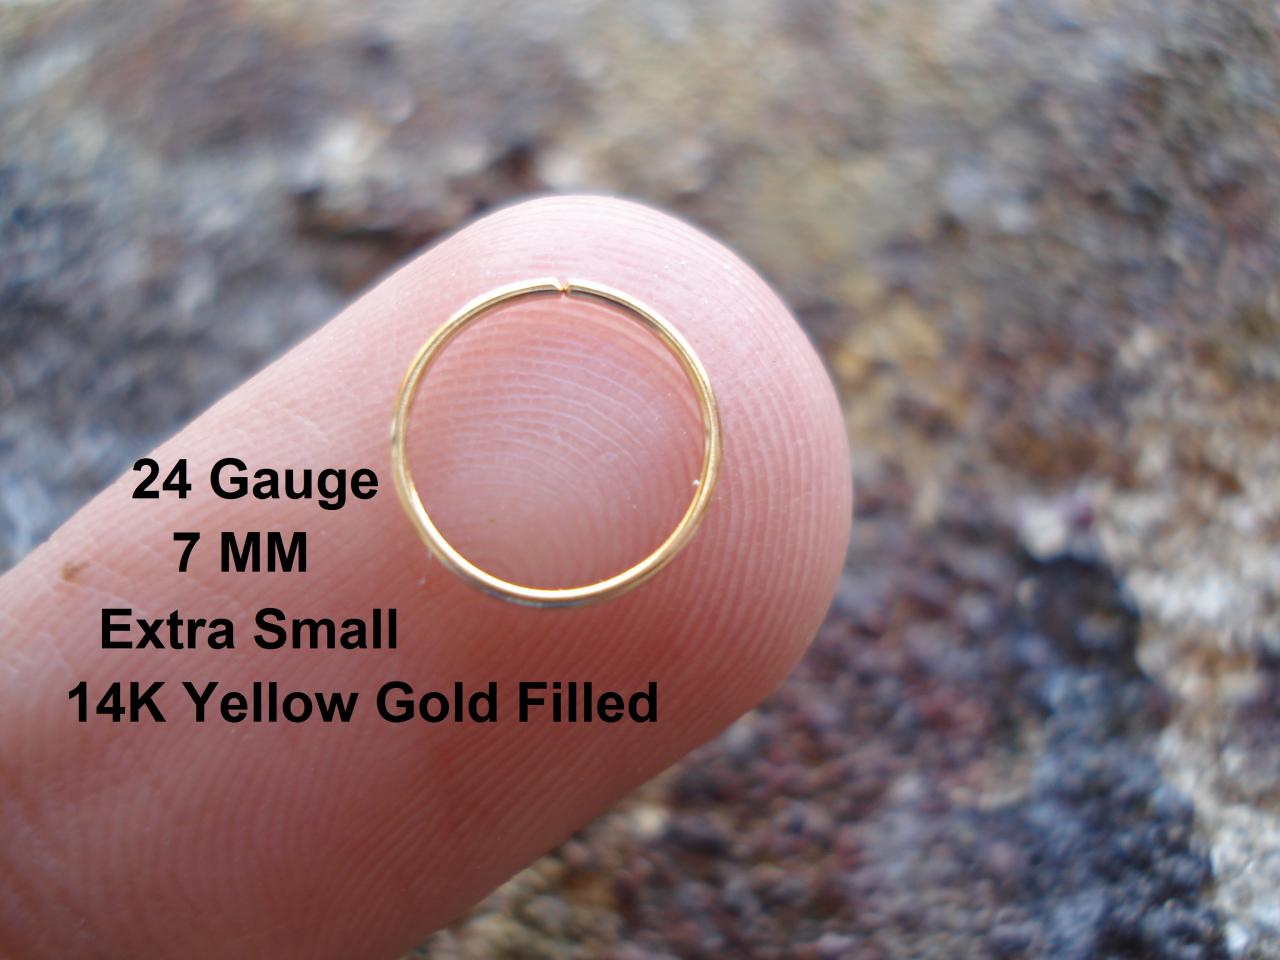 Extra Small 24 Gauge 14k Yellow Gold Filled For Nose Ring/hoop Helix/earring/tragus,7 Mm Inner Diameter